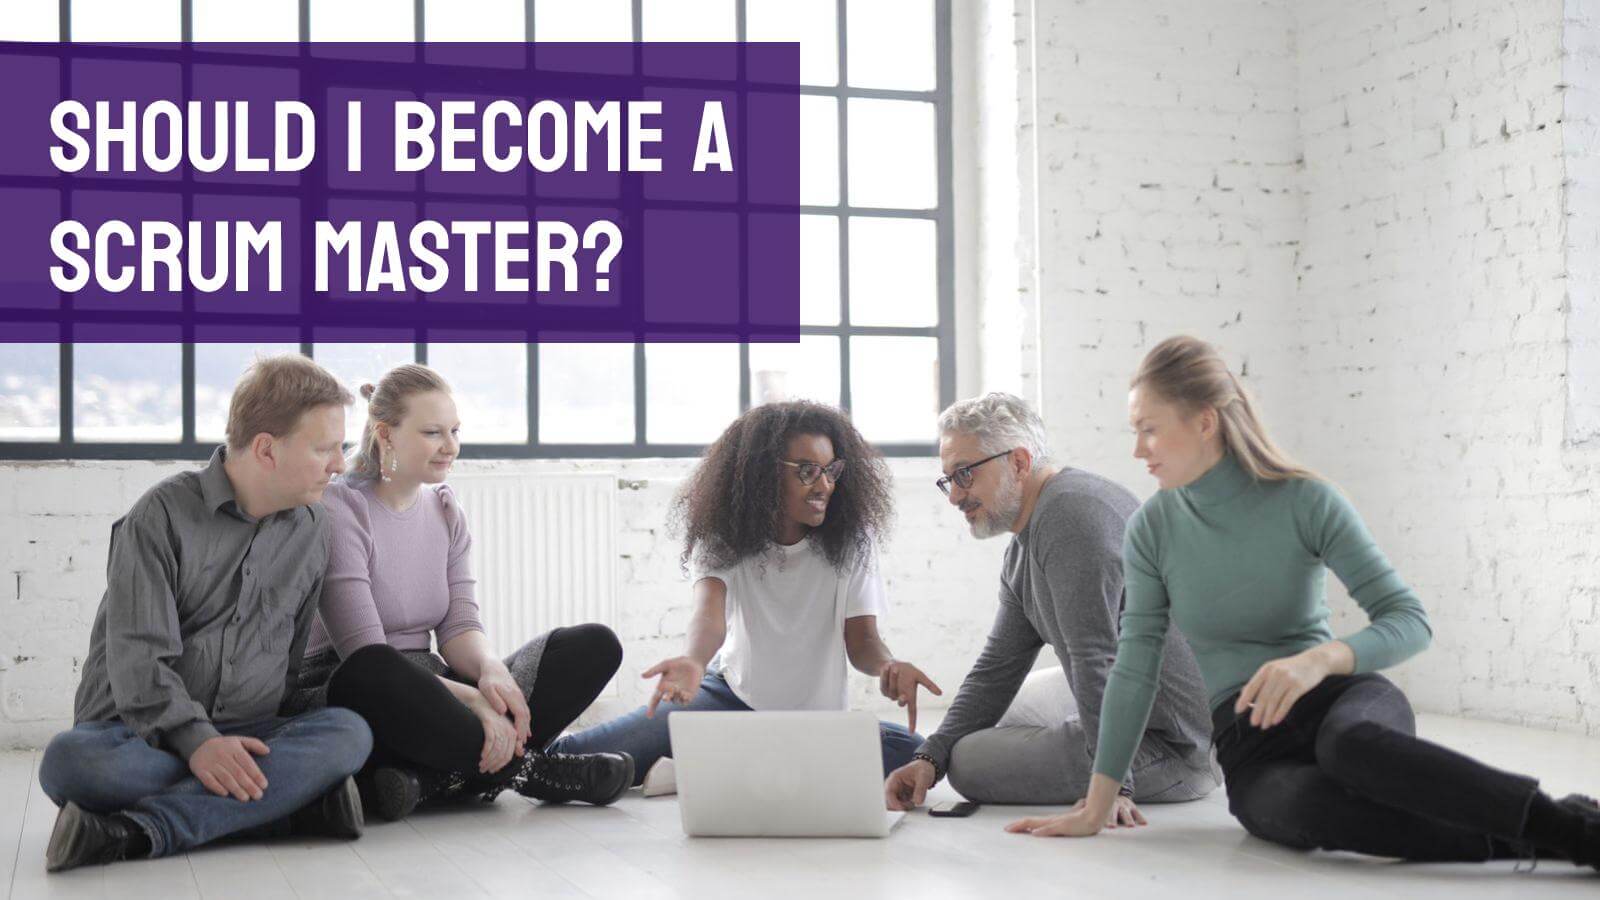 Is the Scrum Master role a good fit for you? Answer those questions and come to your own conclusions